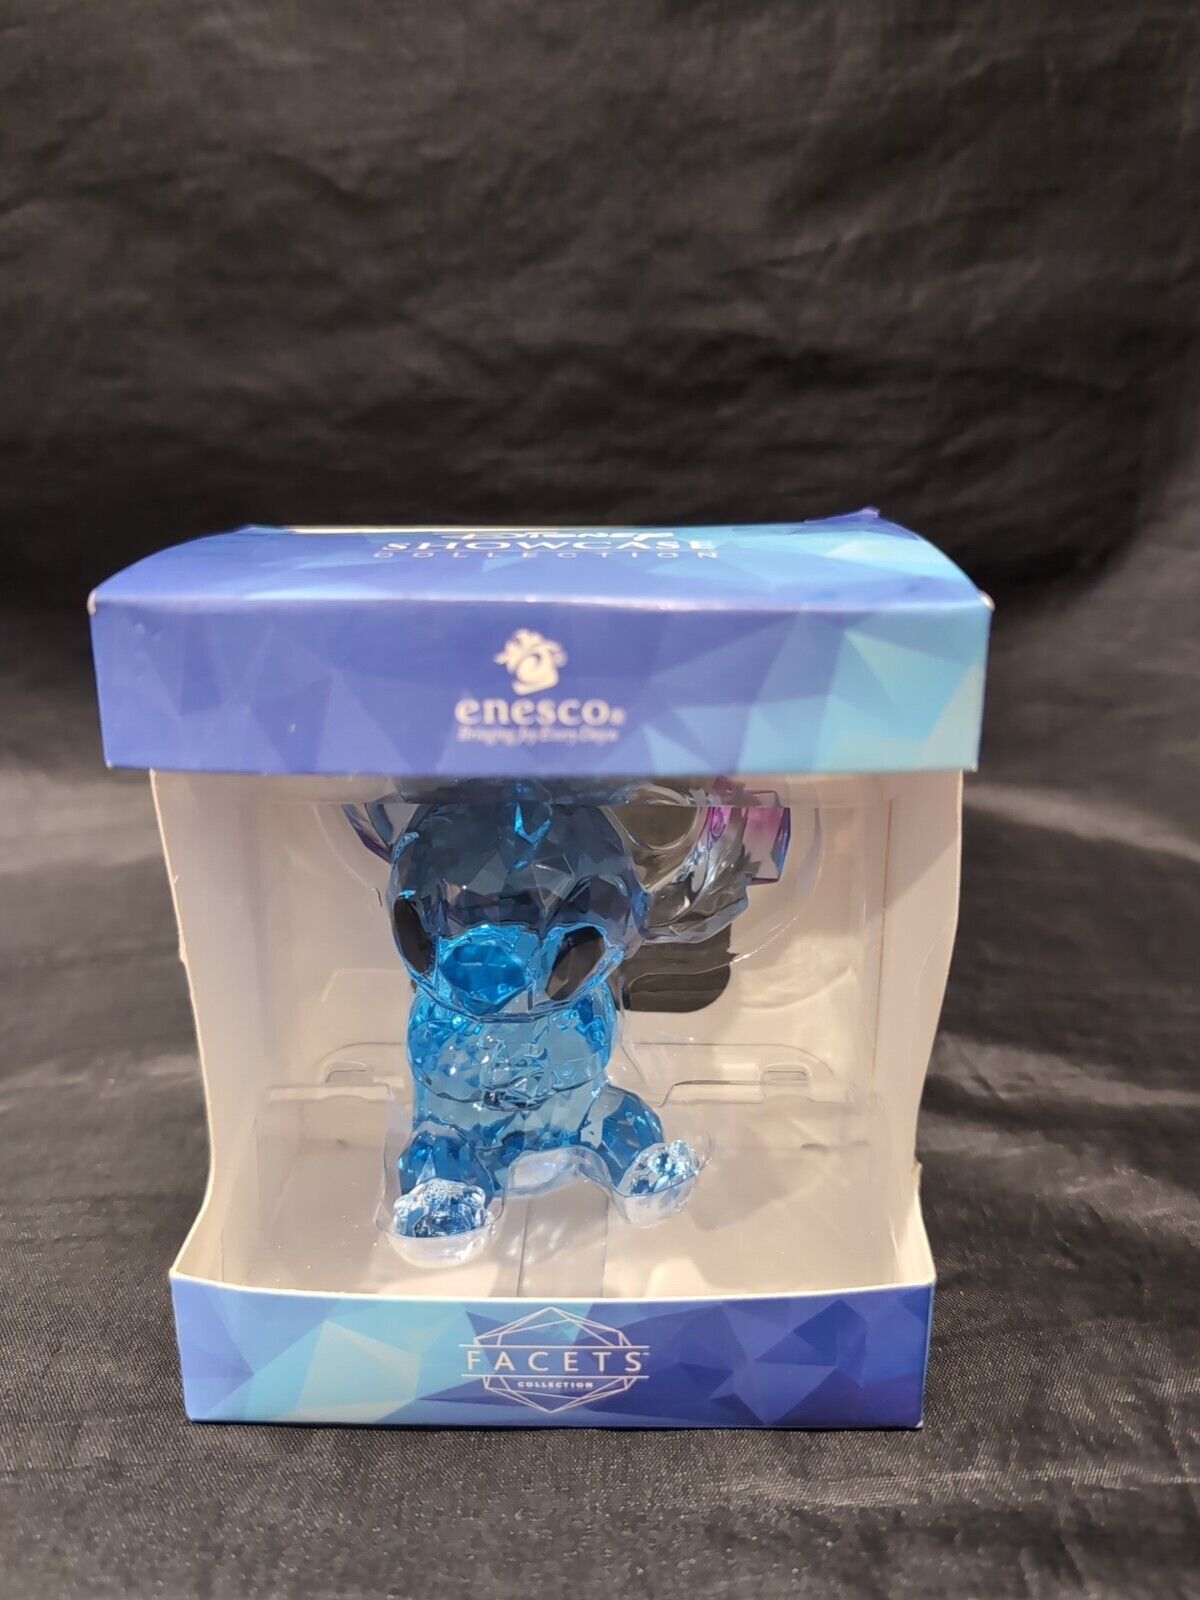 Enesco Facets Disney Stitch Acrylic Facet Collection Figurine New In Box